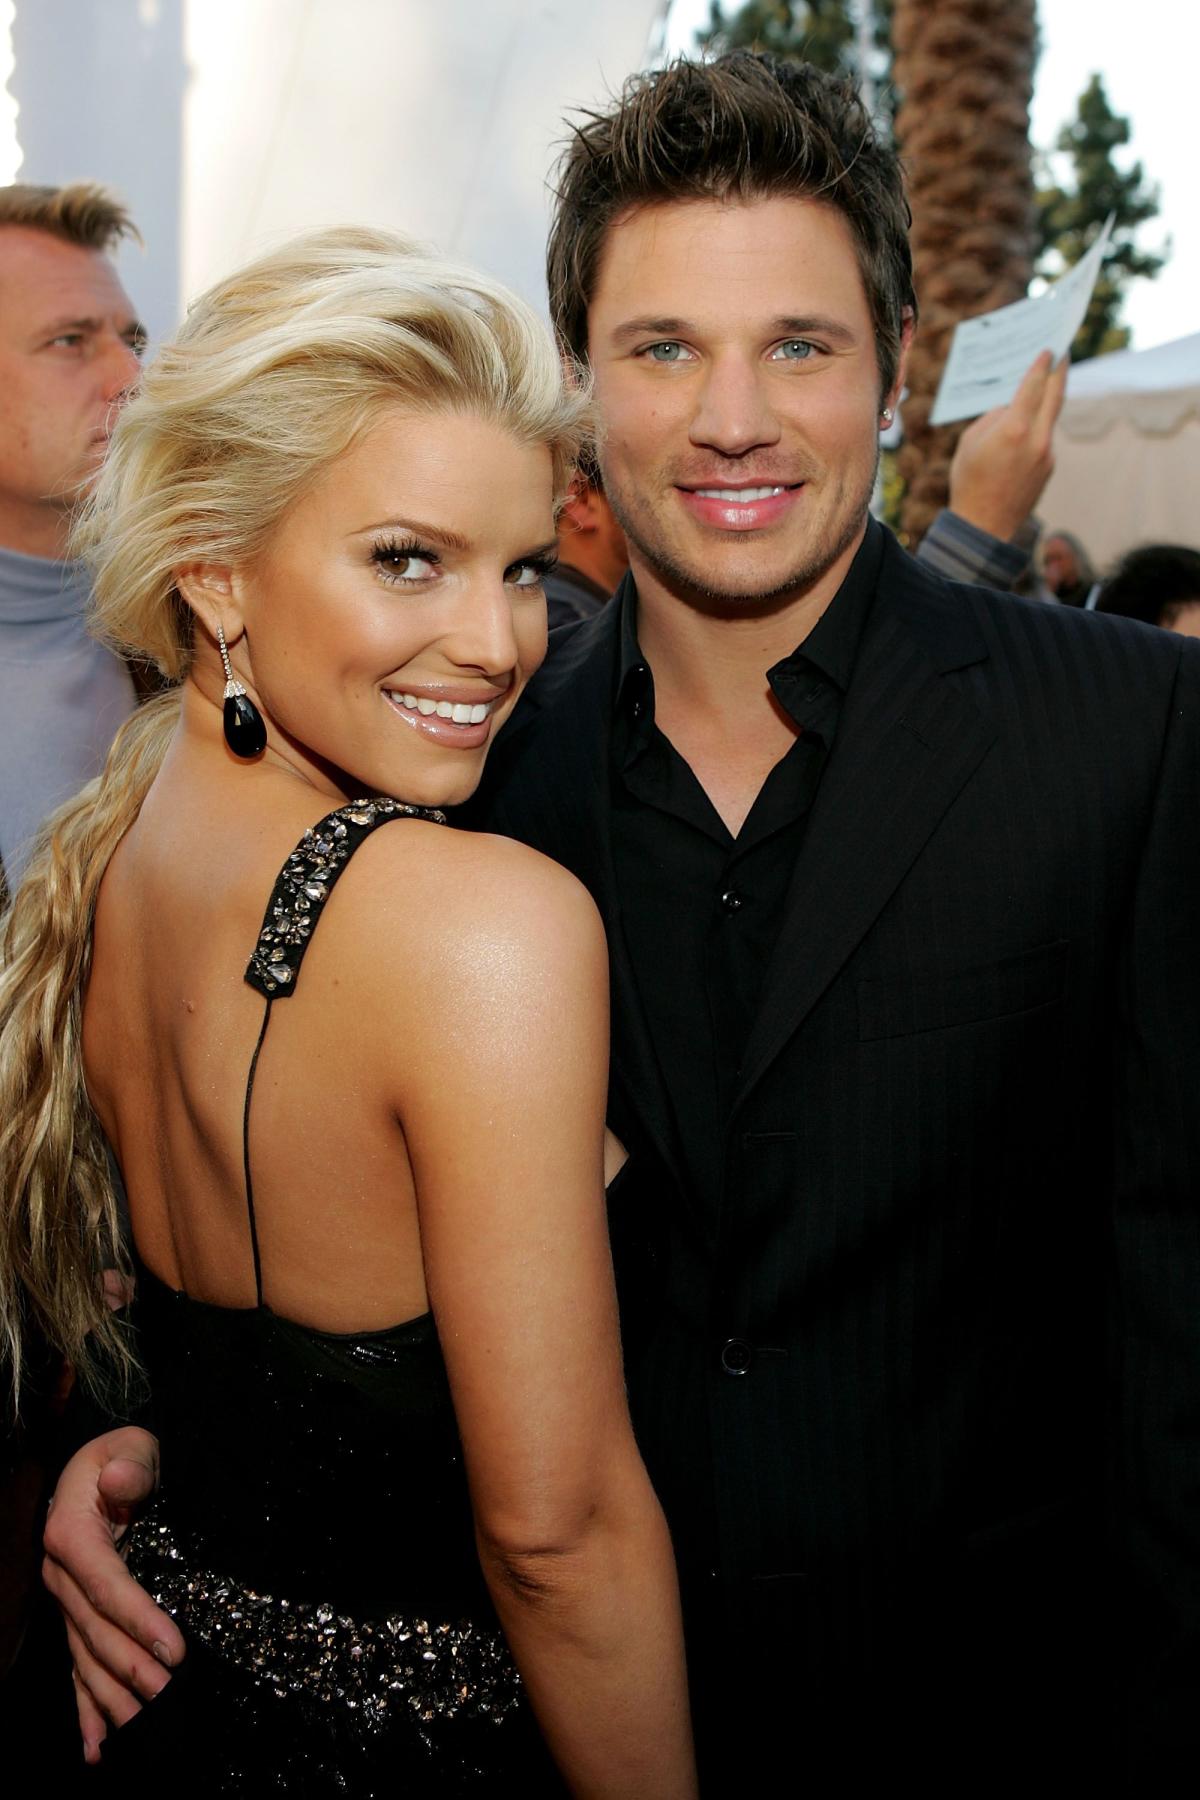 Jessica Simpson and Nick Lachey's Relationship: A Look Back